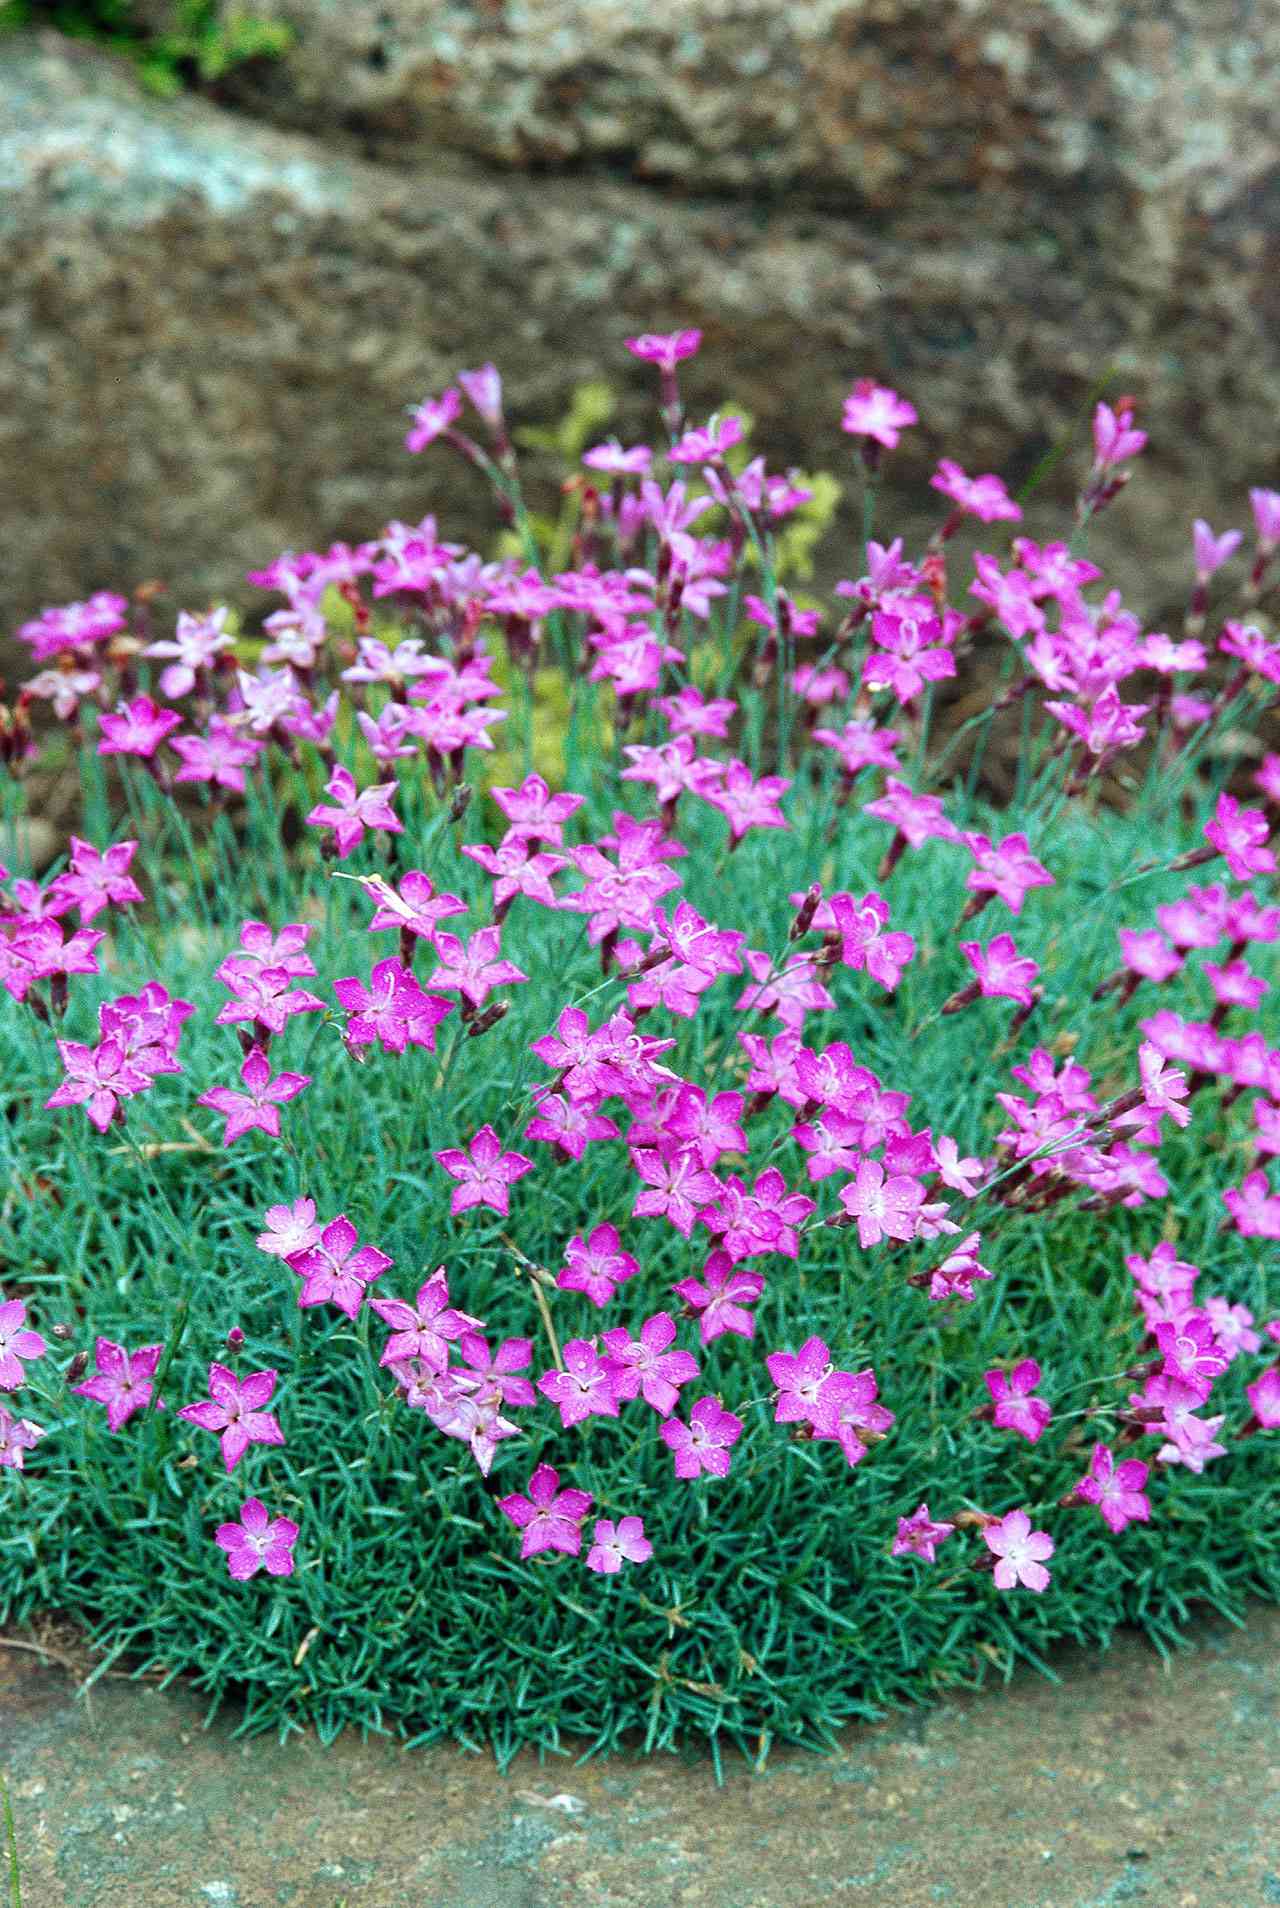 Drought Tolerant Groundcovers Better, Partial Sun Ground Cover